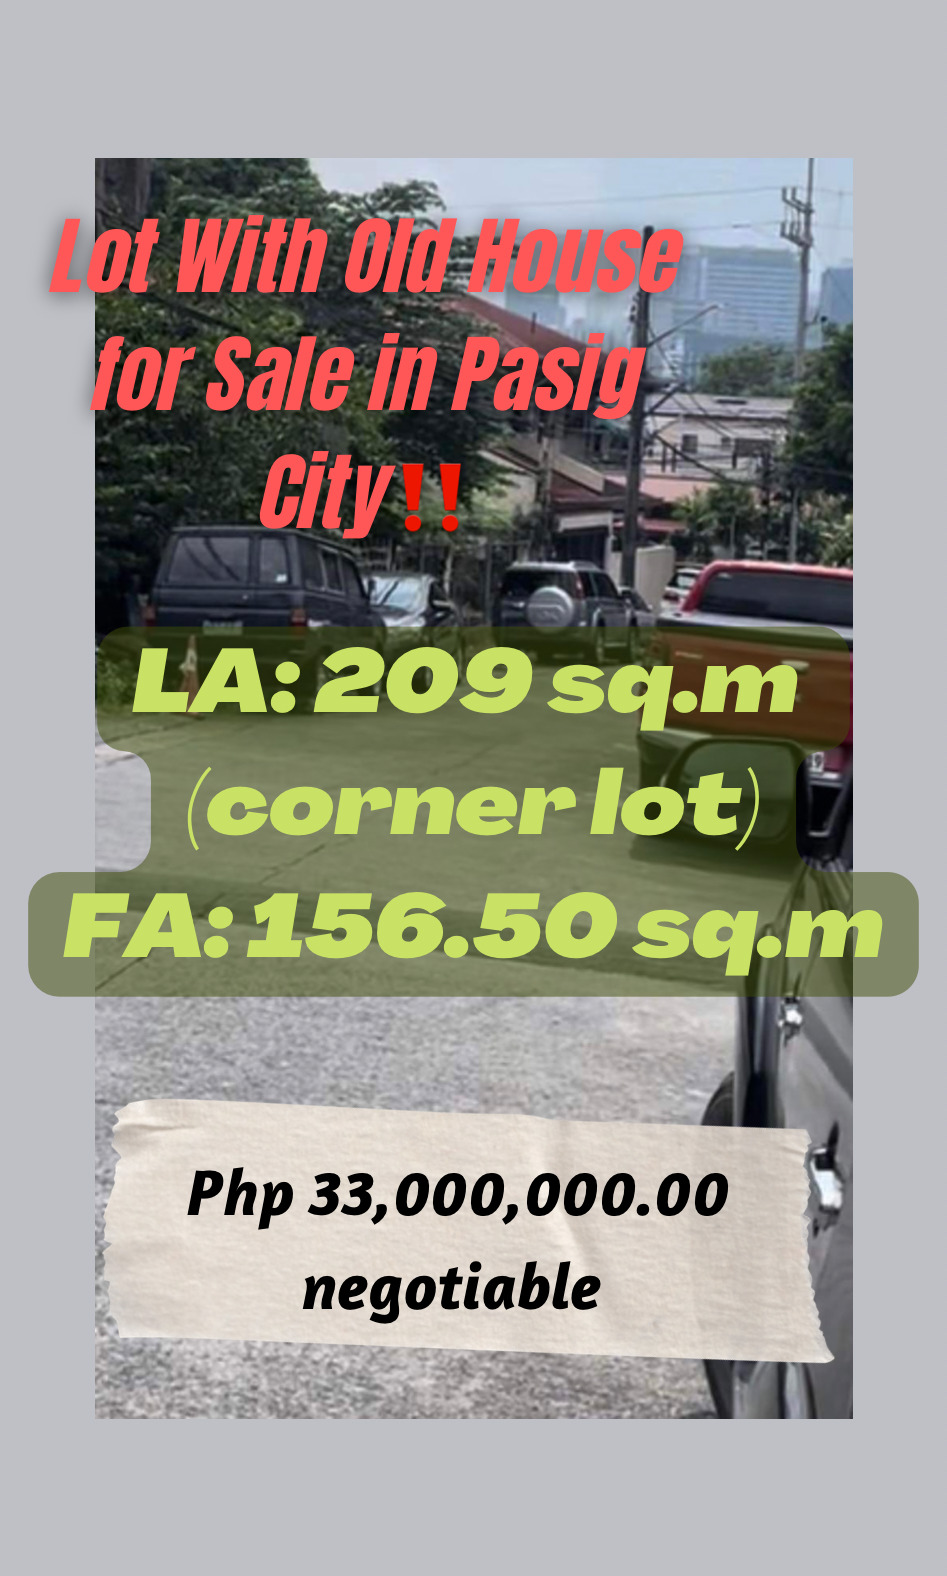 Lot With Old House for Sale in Pasig City‼️